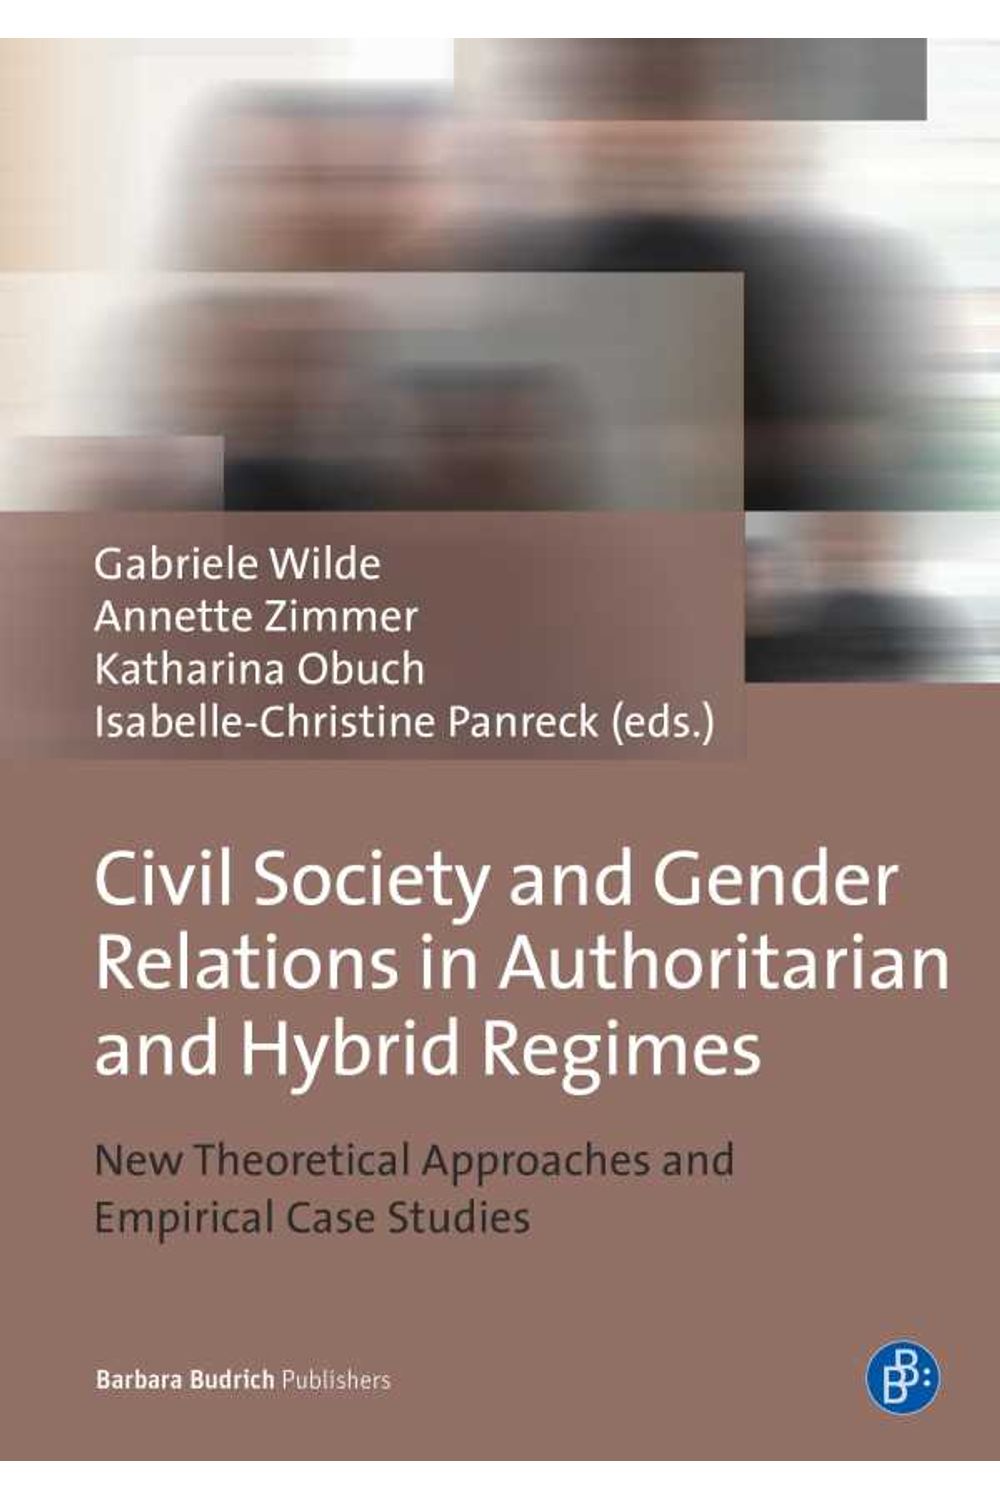 bw-civil-society-and-gender-relations-in-authoritarian-and-hybrid-regimes-verlag-barbara-budrich-9783847416012